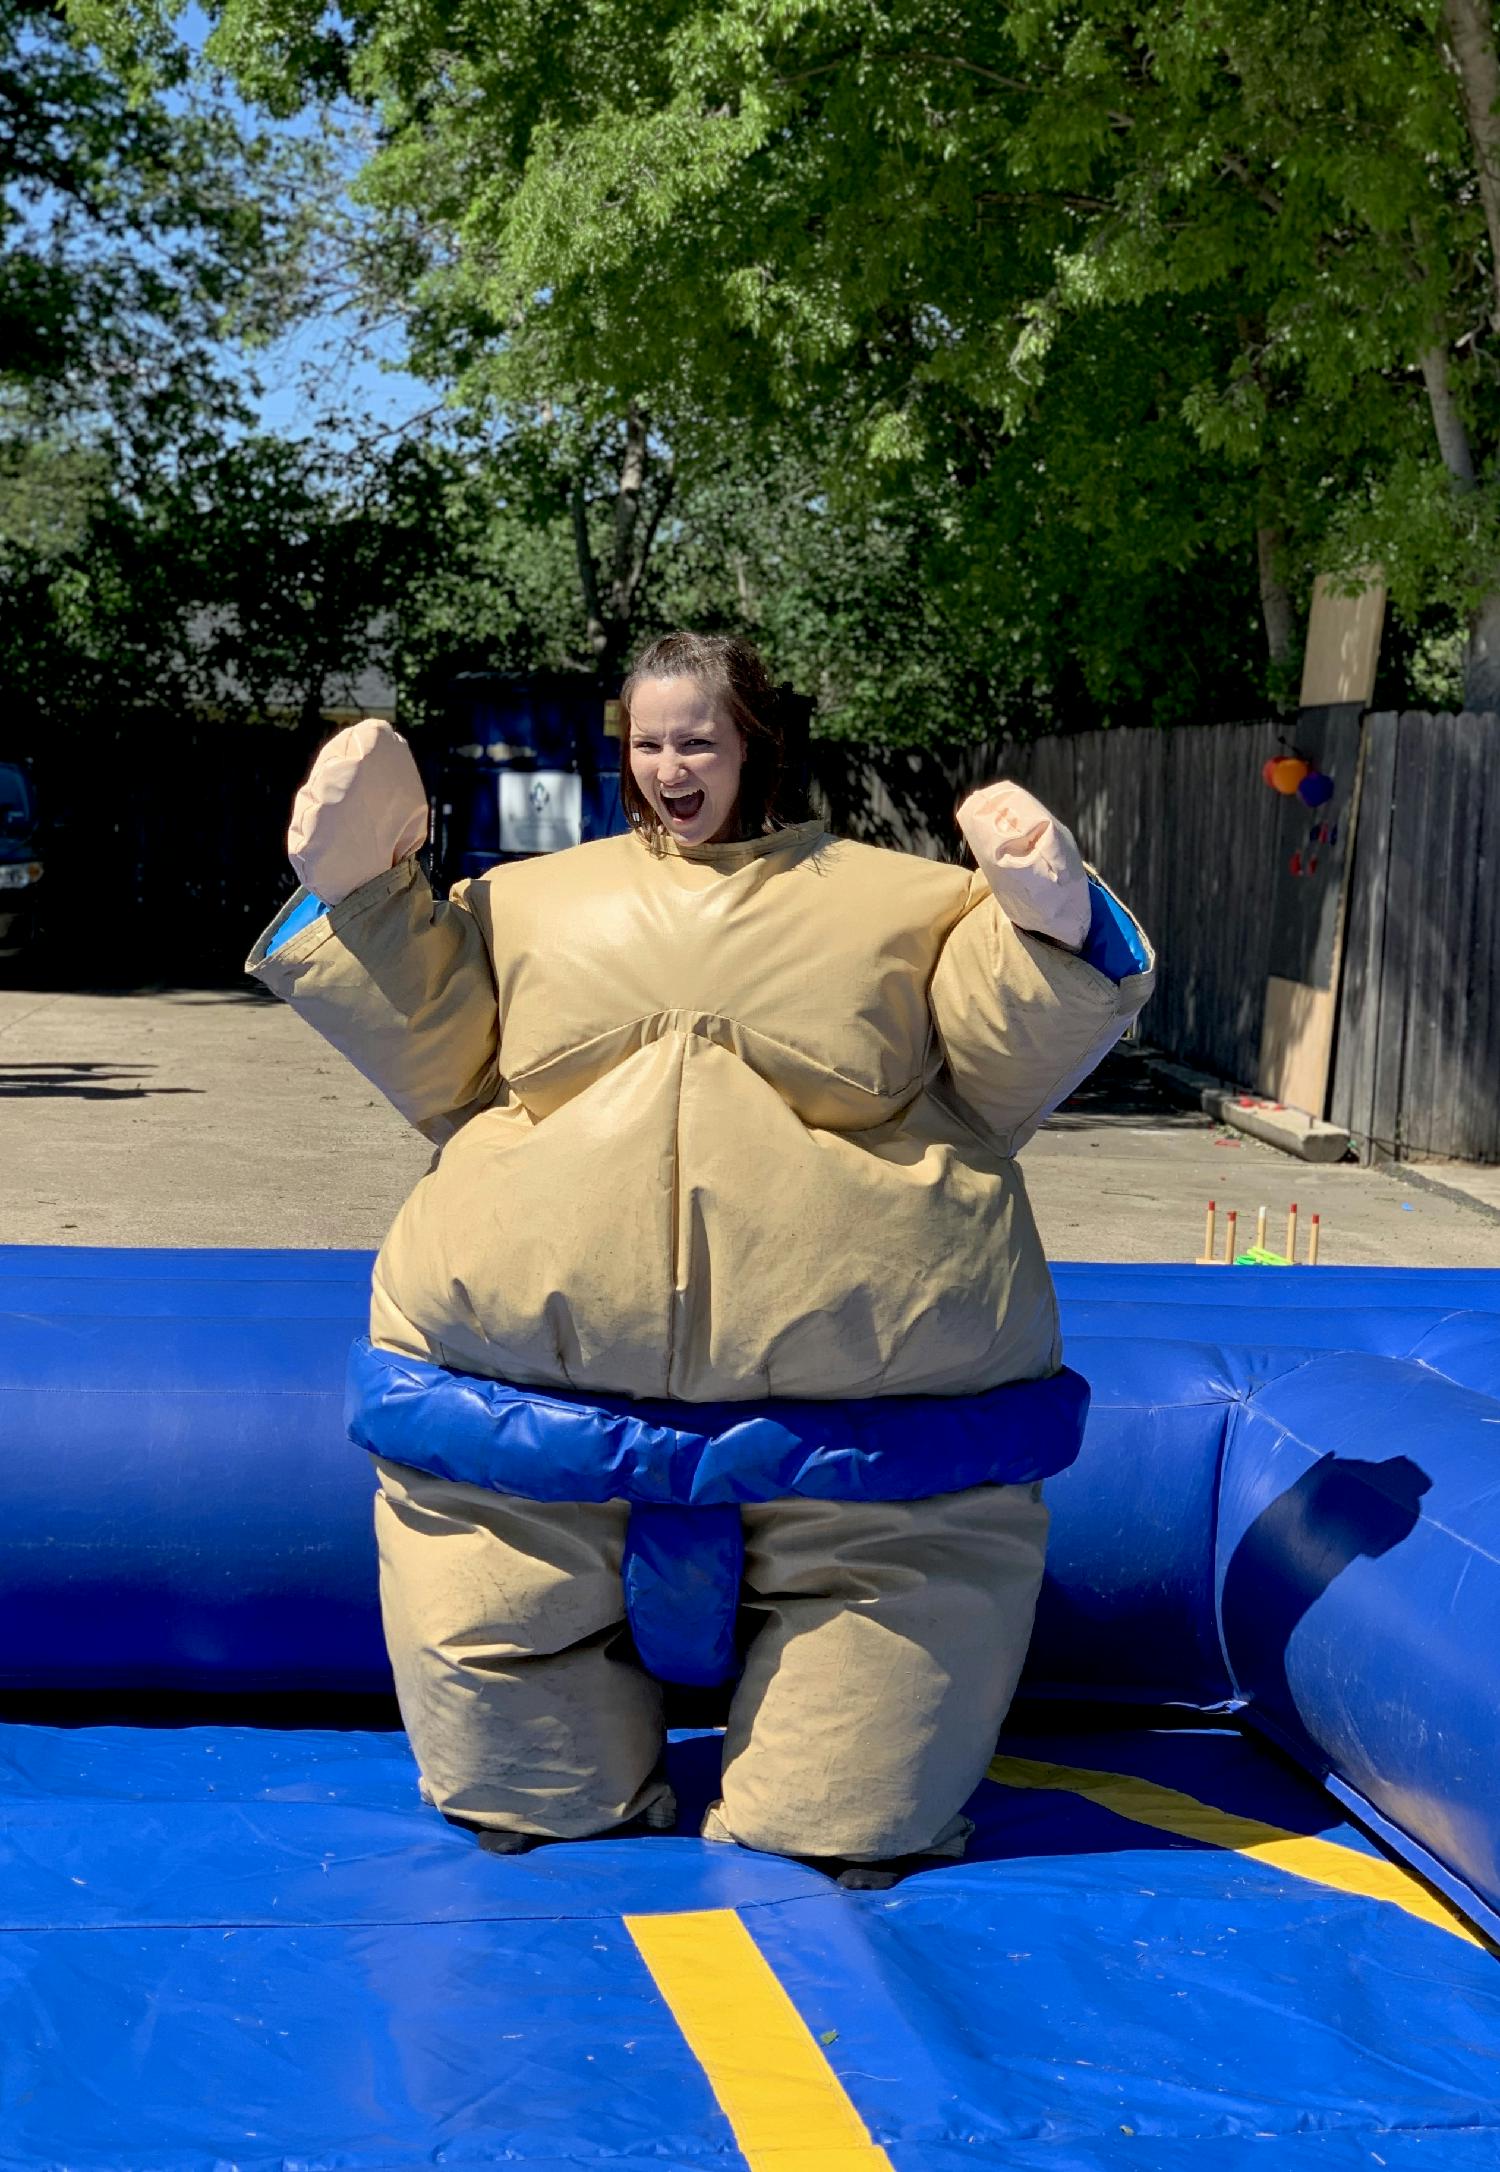 Our customer service manager is ready to take on her next Sumo opponent at the family carnival. 